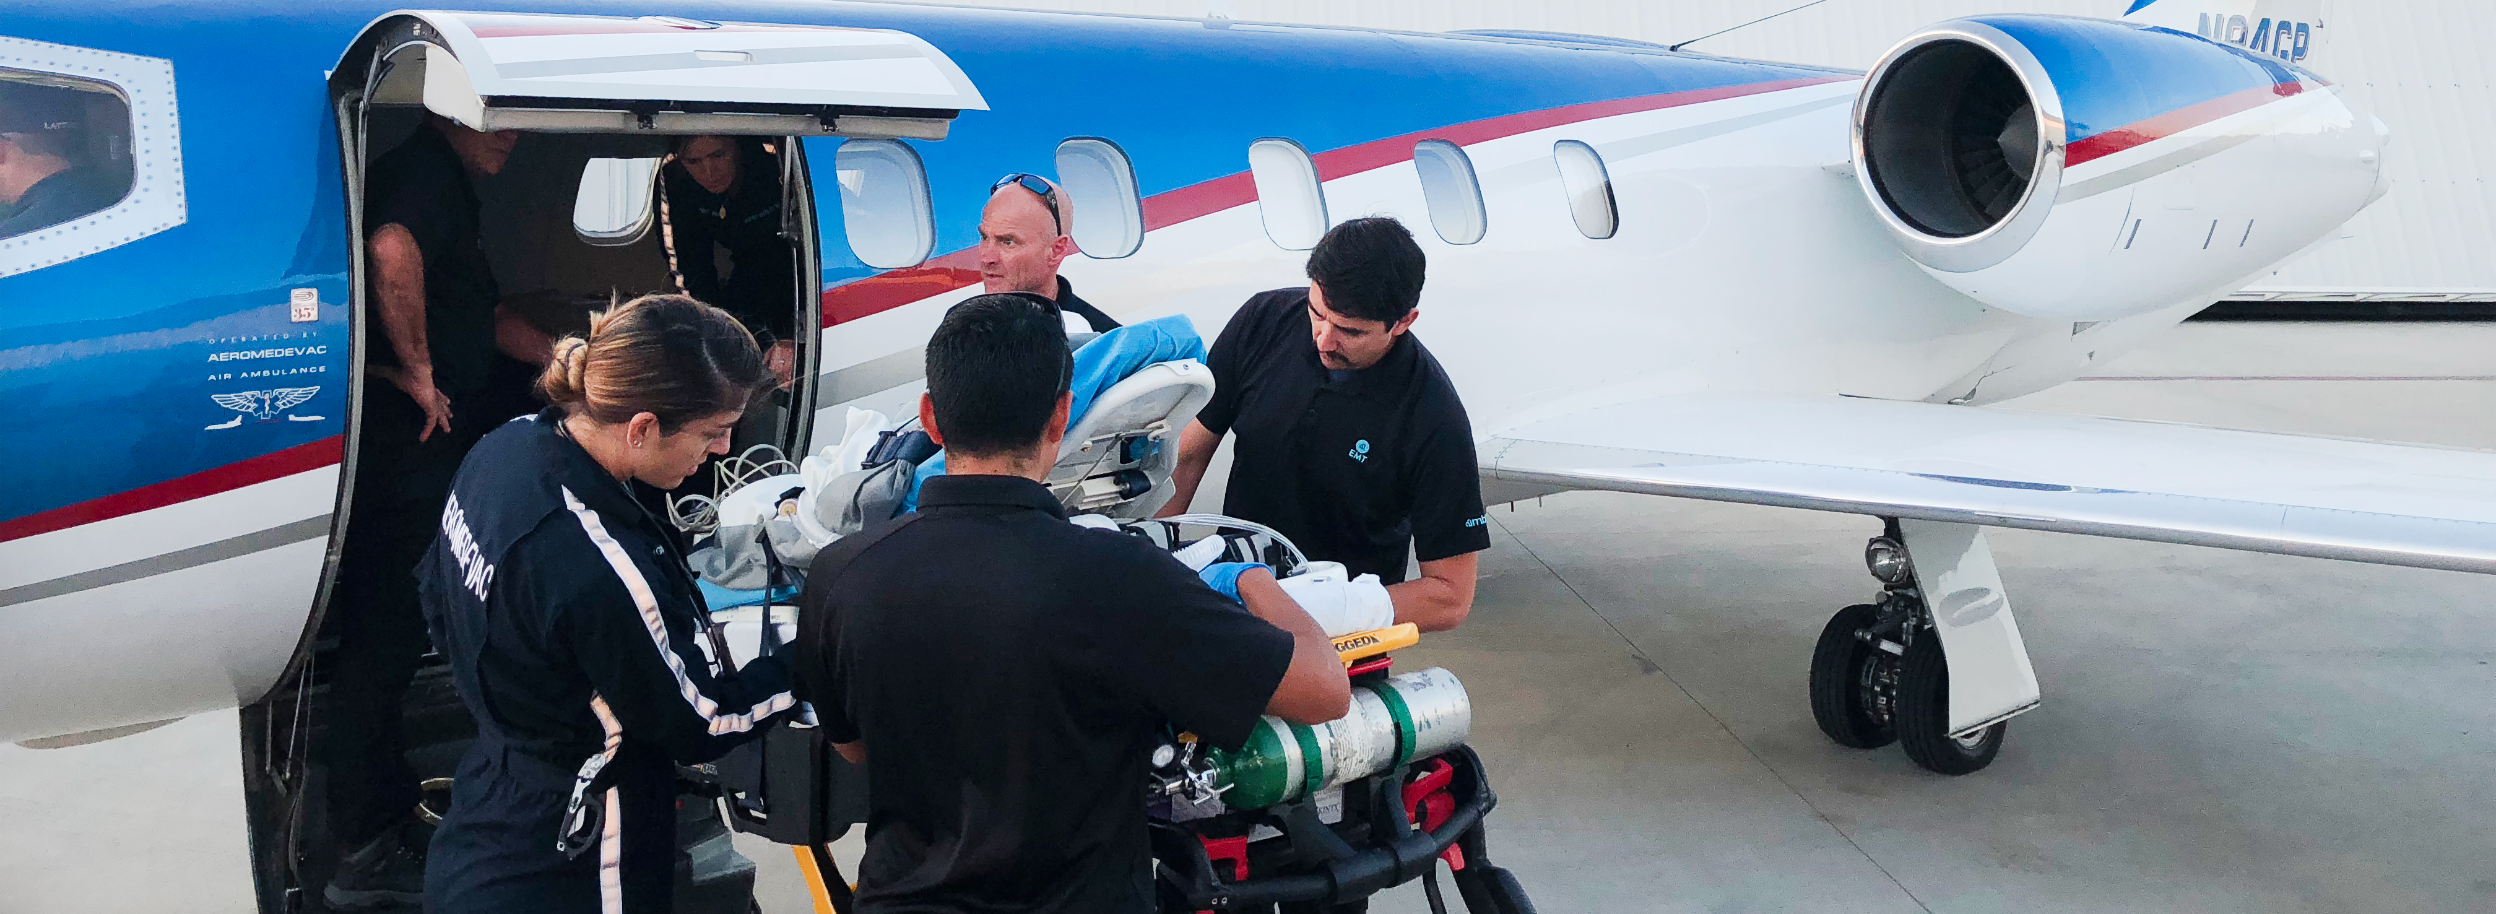 The Aeromedevac Medical team readies a patient to board a medical jet plane